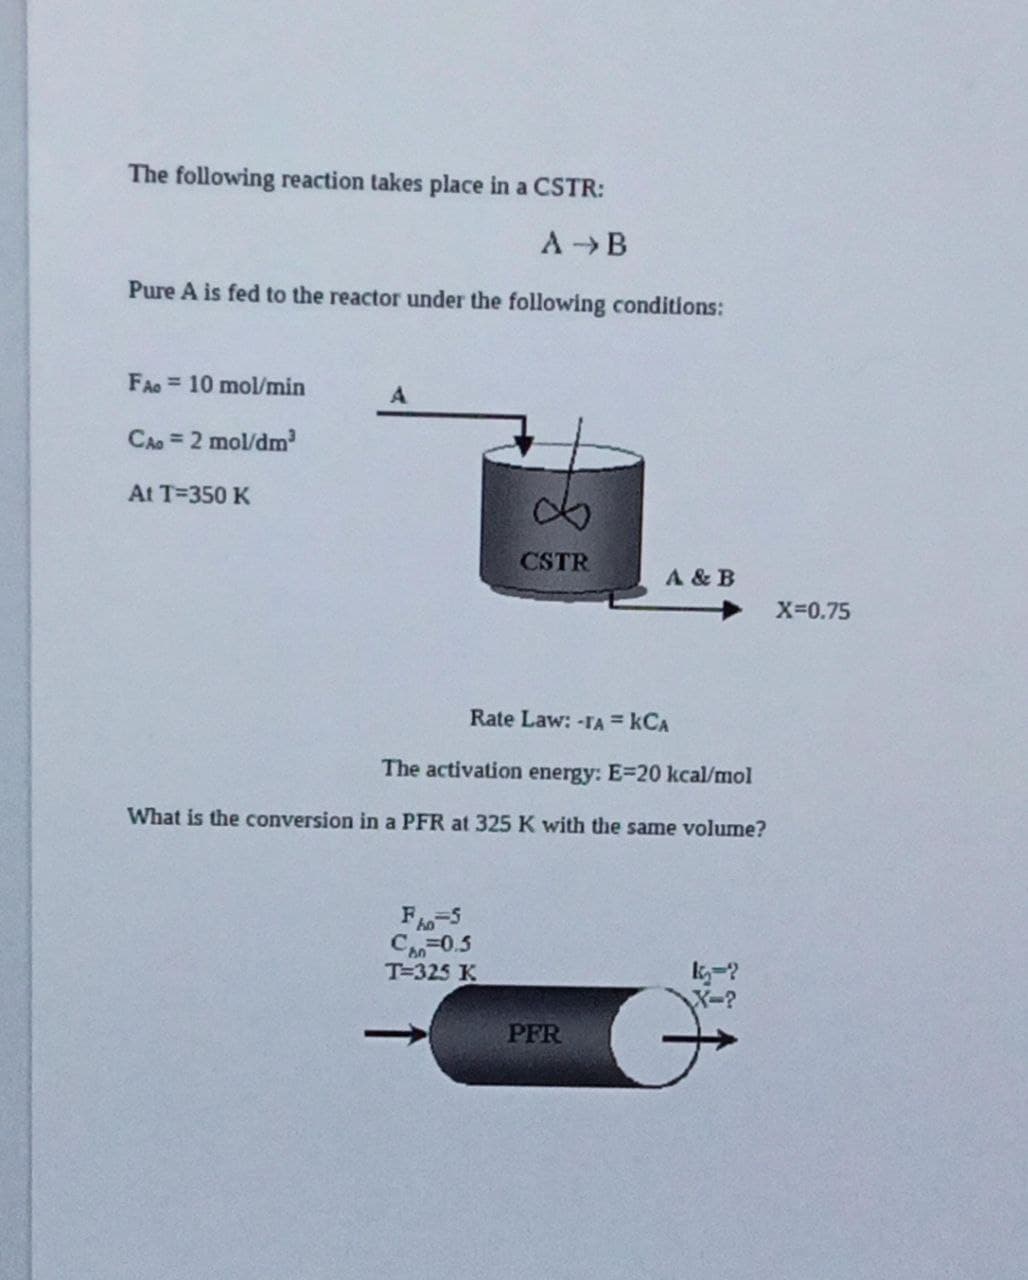 The following reaction takes place in a CSTR:
A→B
Pure A is fed to the reactor under the following conditions:
FA 10 mol/min
A
Cao = 2 mol/dm3
At T=350 K
CSTR
A & B
X=0.75
Rate Law: -TA = KCA
The activation energy: E-20 kcal/mol
What is the conversion in a PFR at 325 K with the same volume?
F-5
C=0.5
T=325 K
PFR